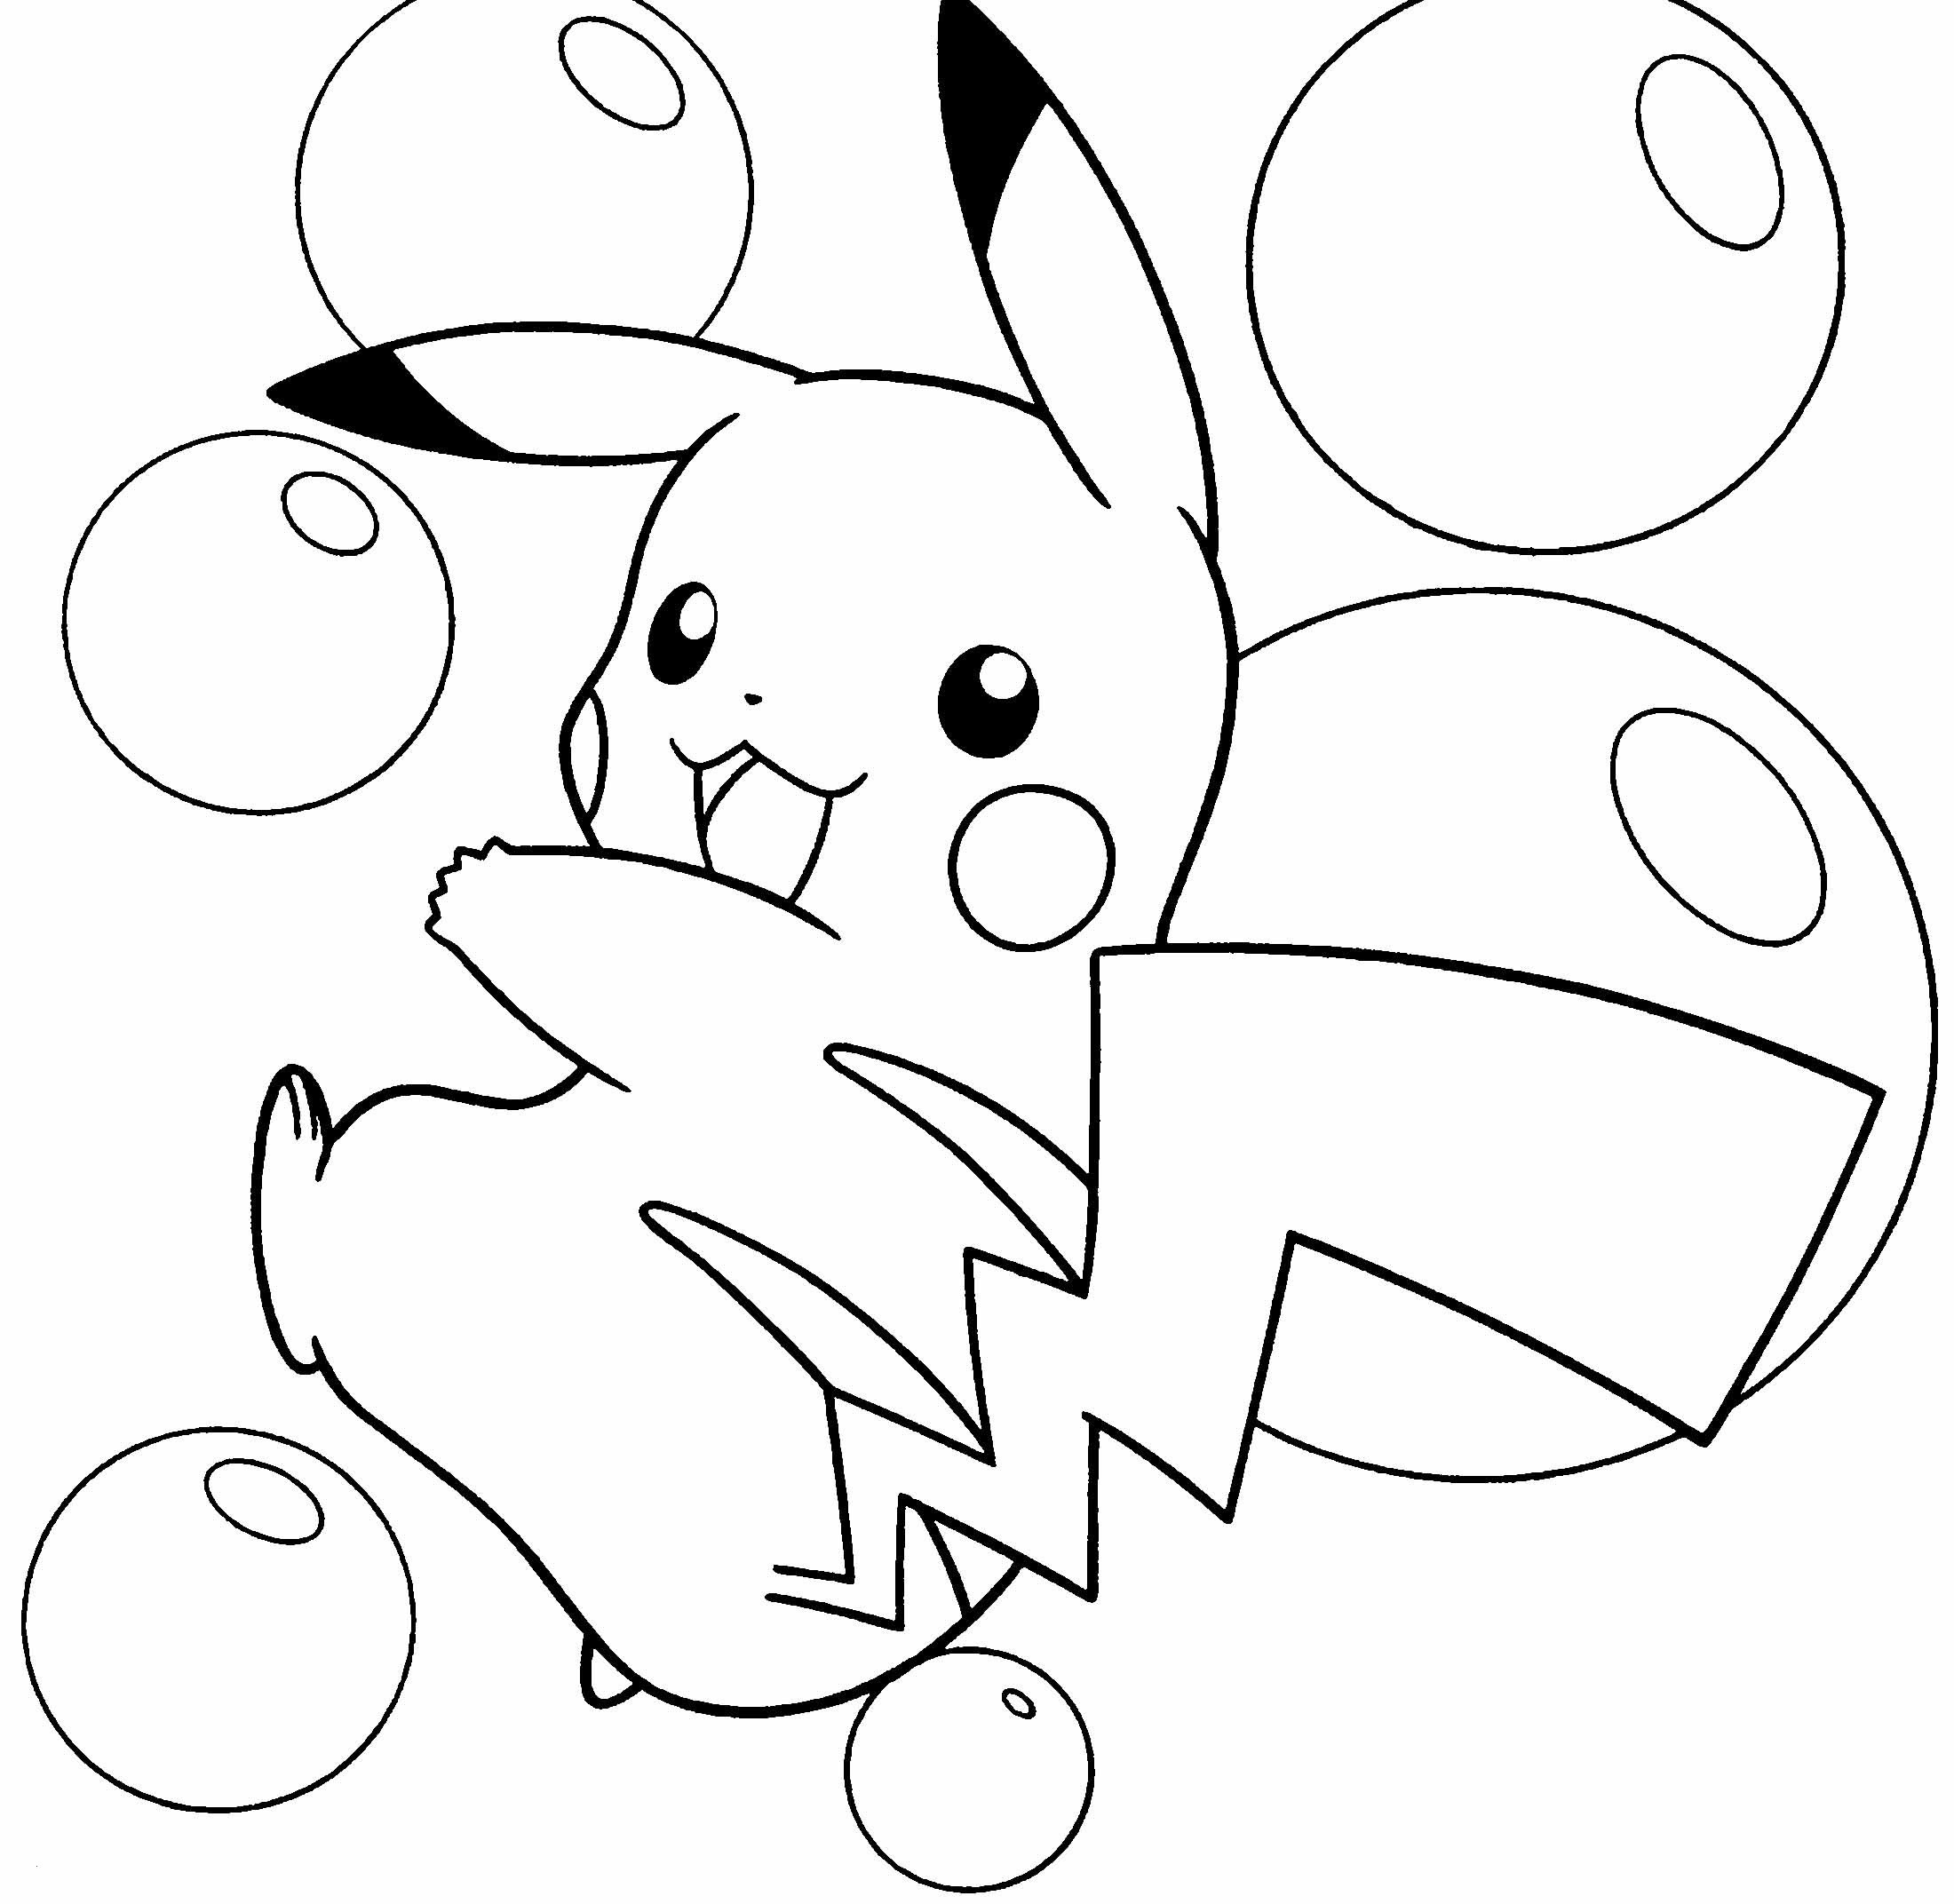 Pikachu Colouring Pages Online Wallpaper